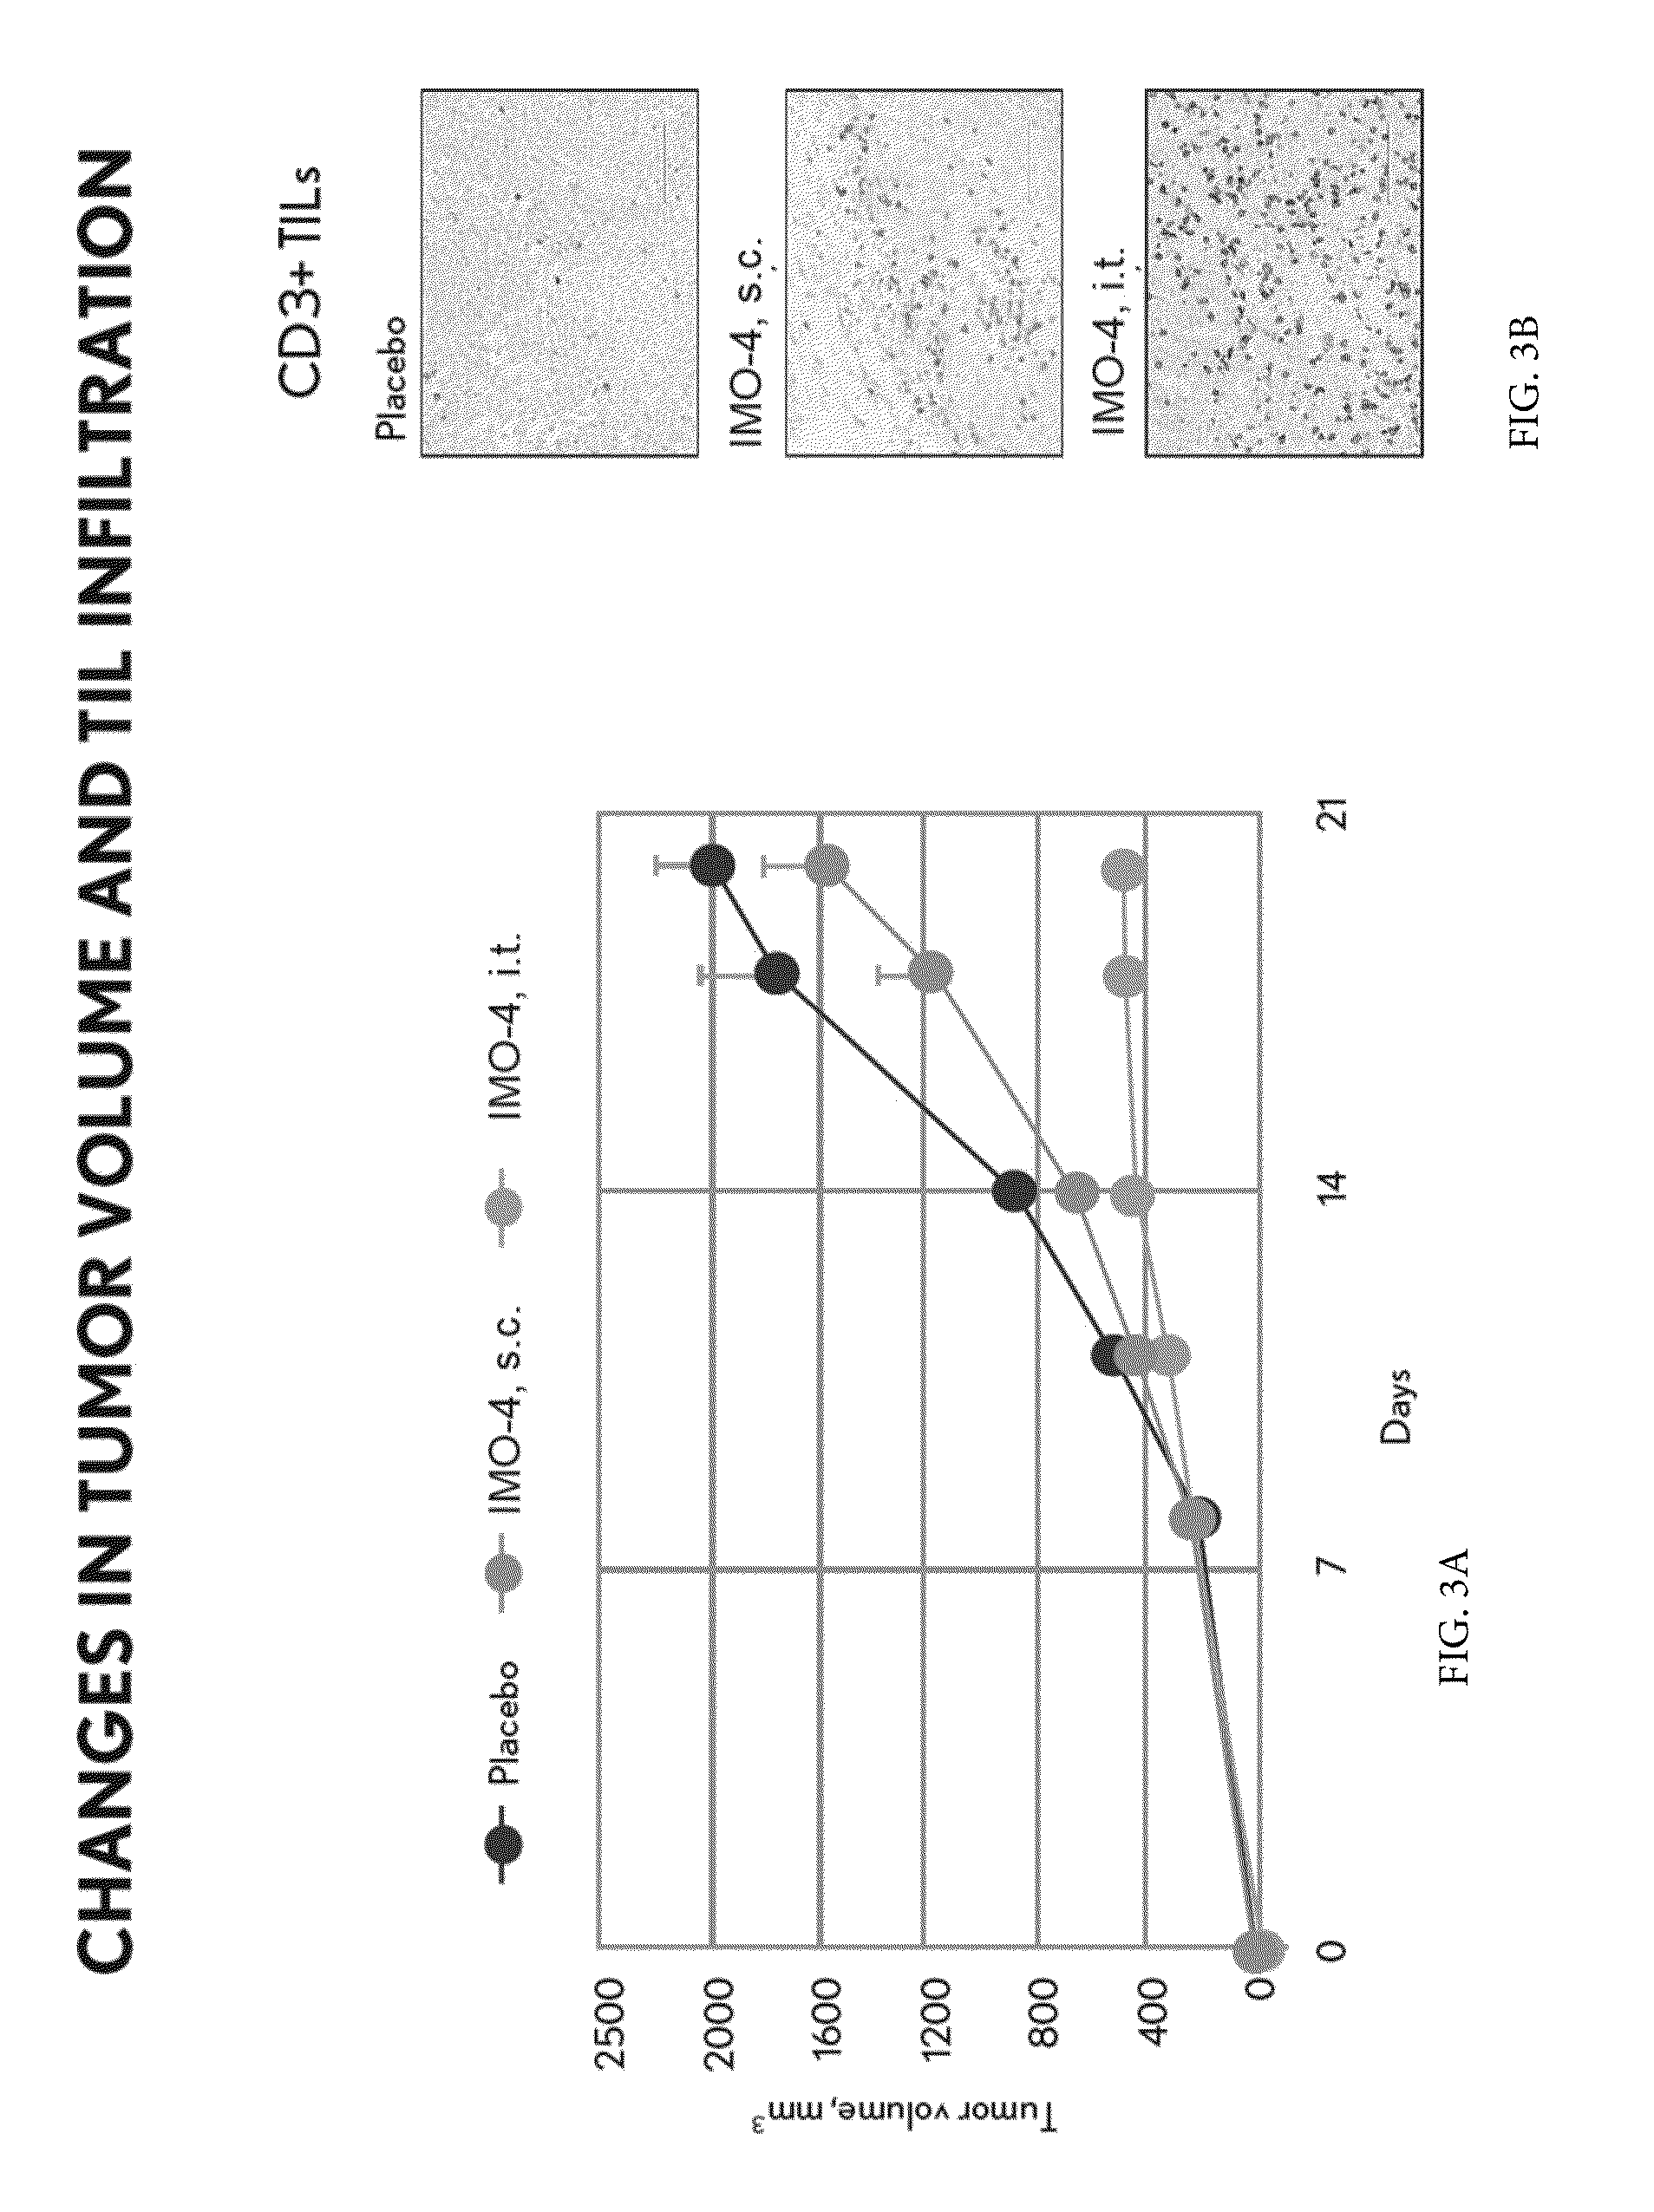 Treatment of cancer using tlr9 agonist with checkpoint inhibitors